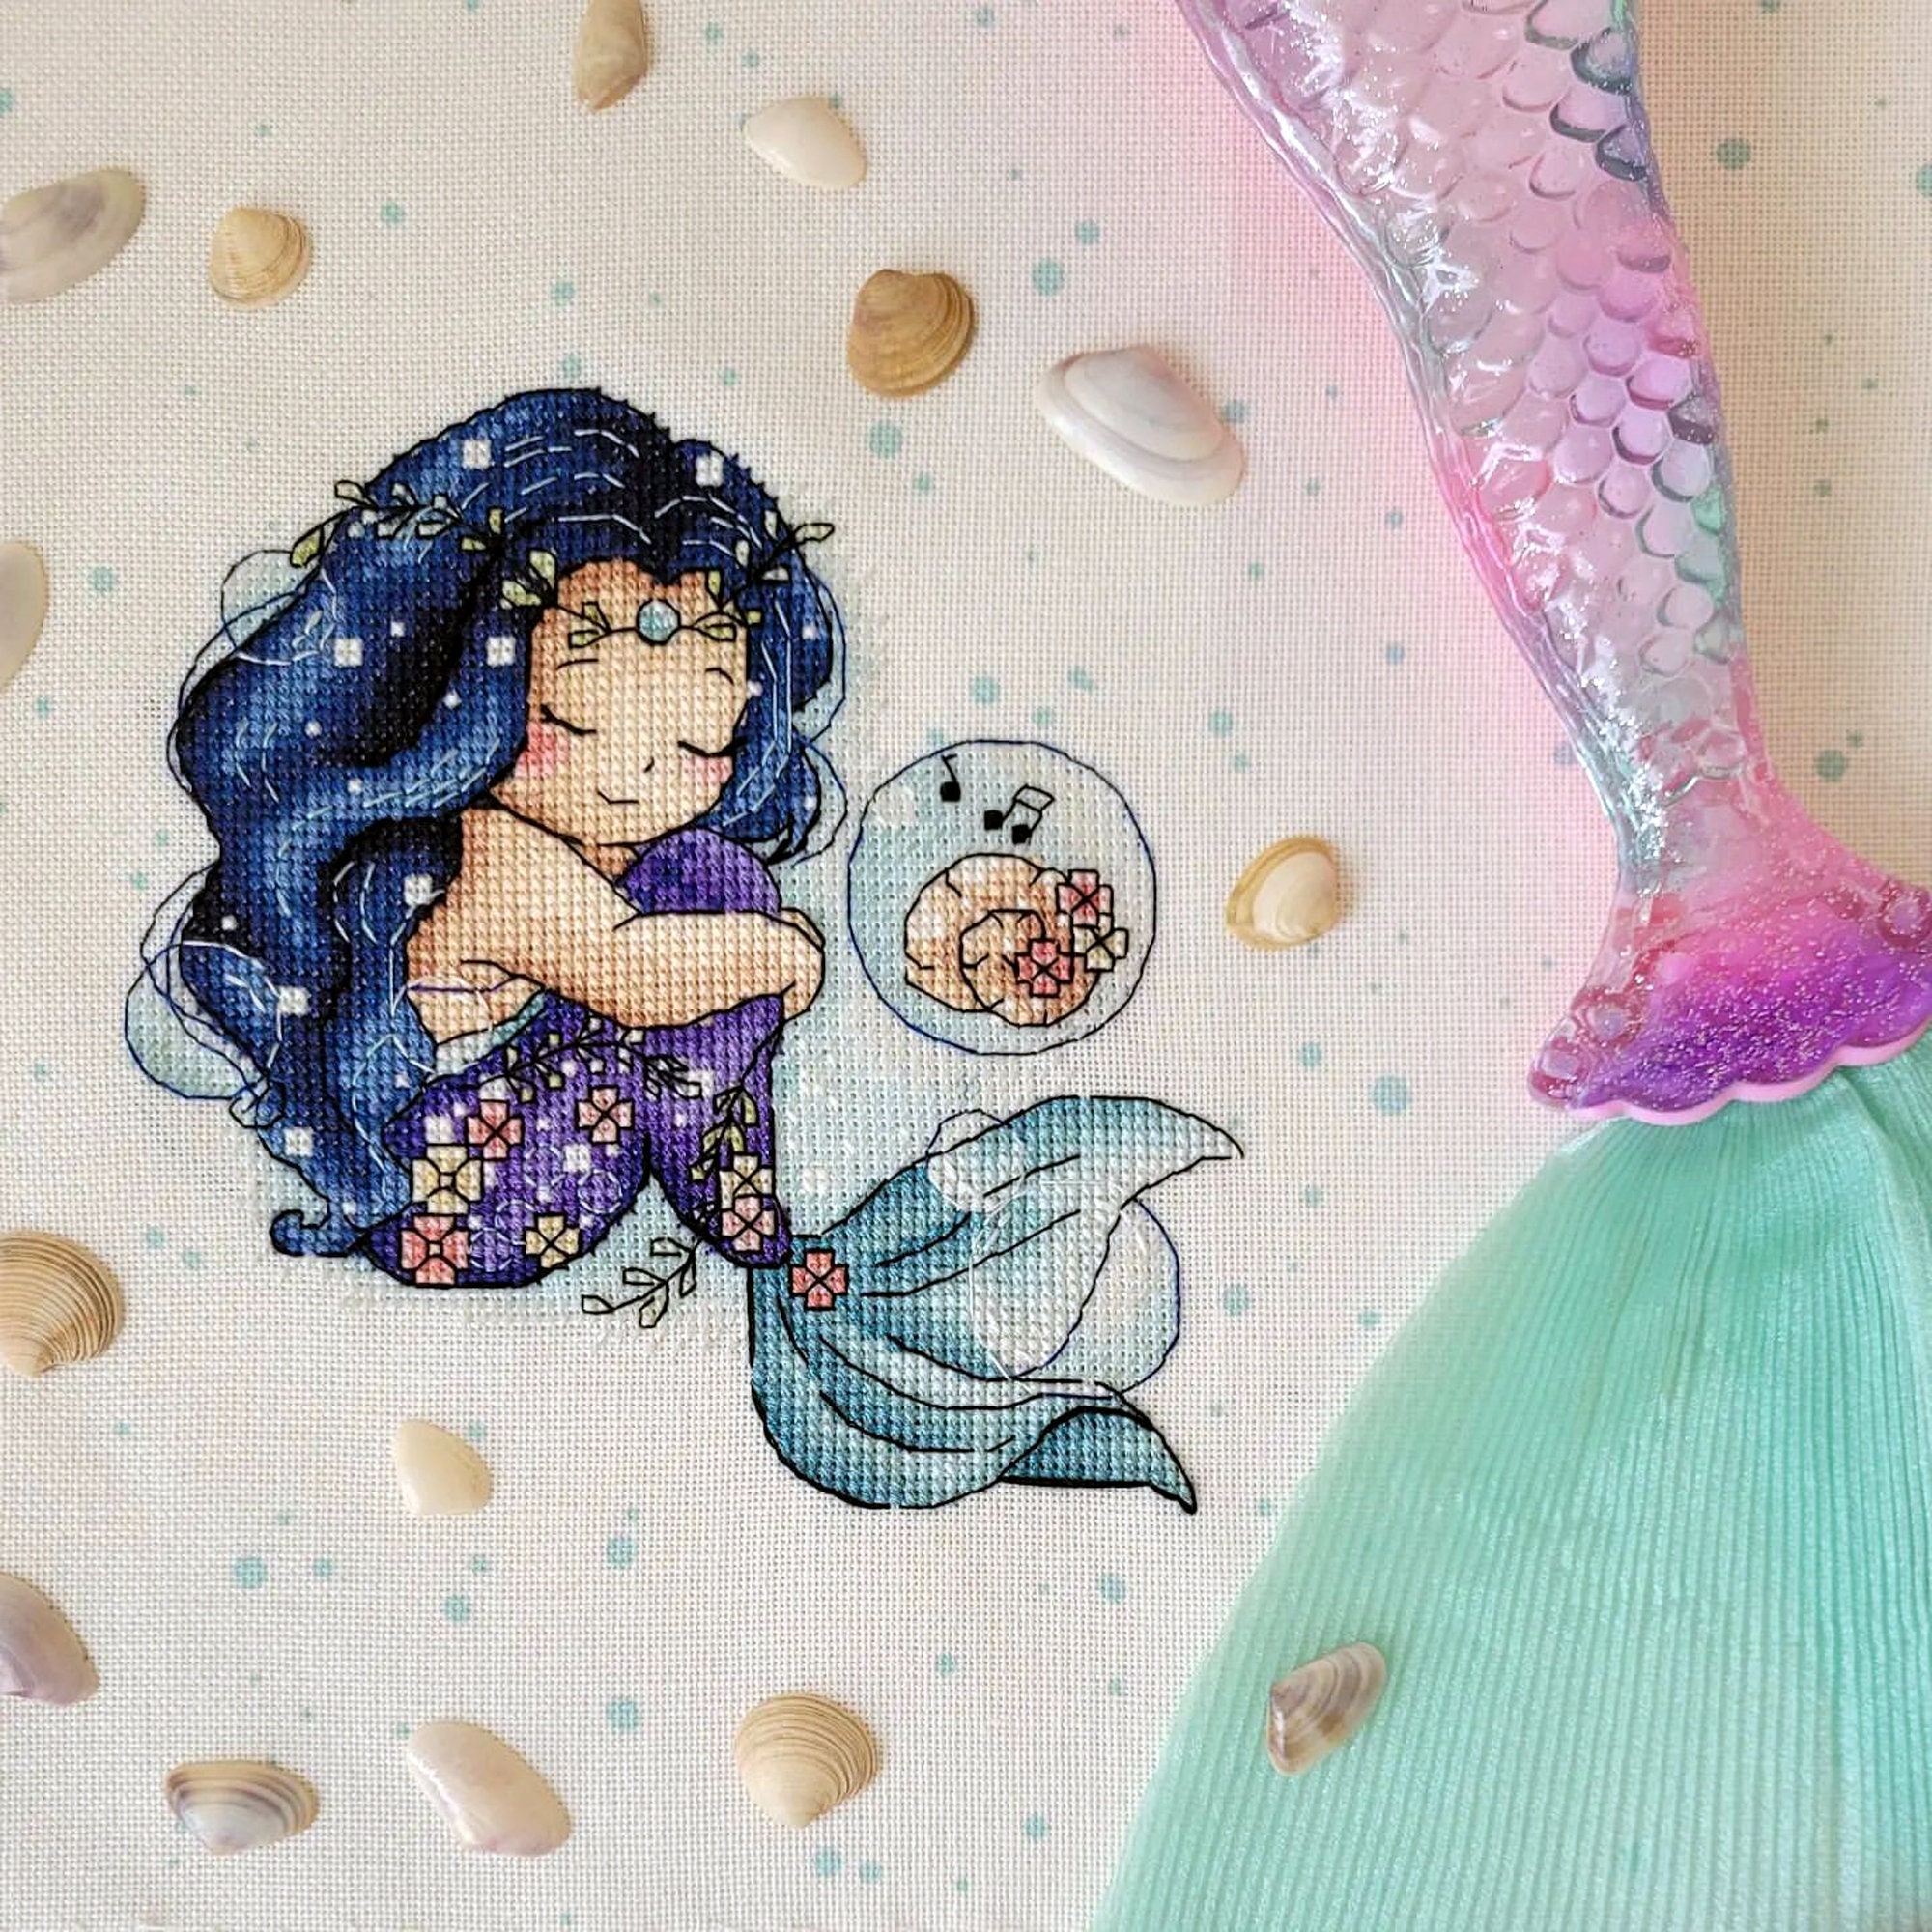 Mermaid Wishes - Hand Stitch Embroidery Transfer Pattern